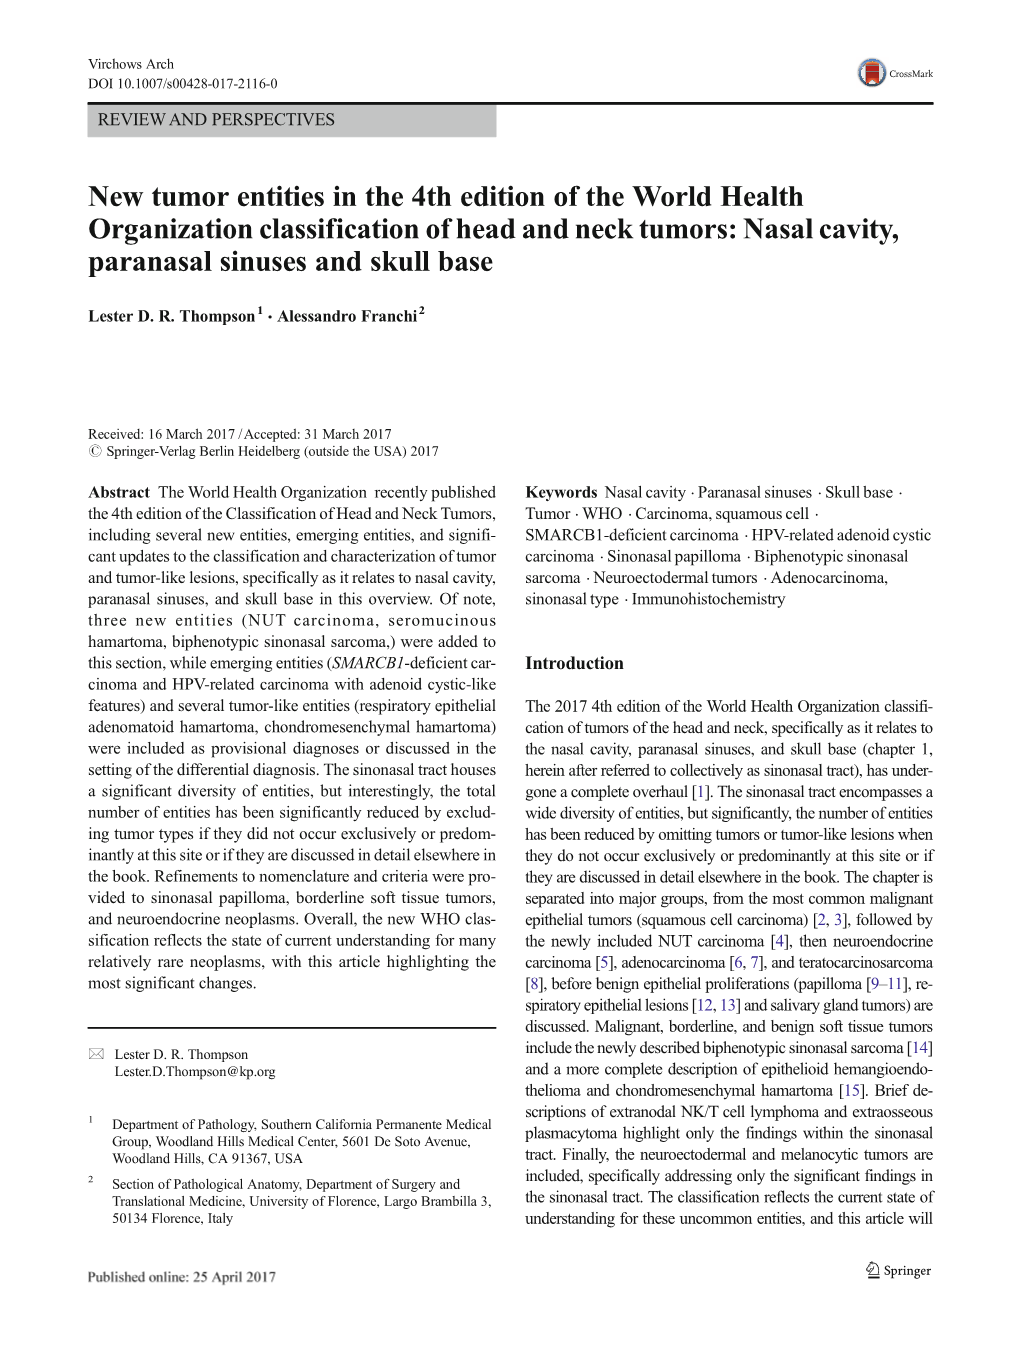 New Tumor Entities in the 4Th Edition of the World Health Organization Classification of Head and Neck Tumors: Nasal Cavity, Paranasal Sinuses and Skull Base